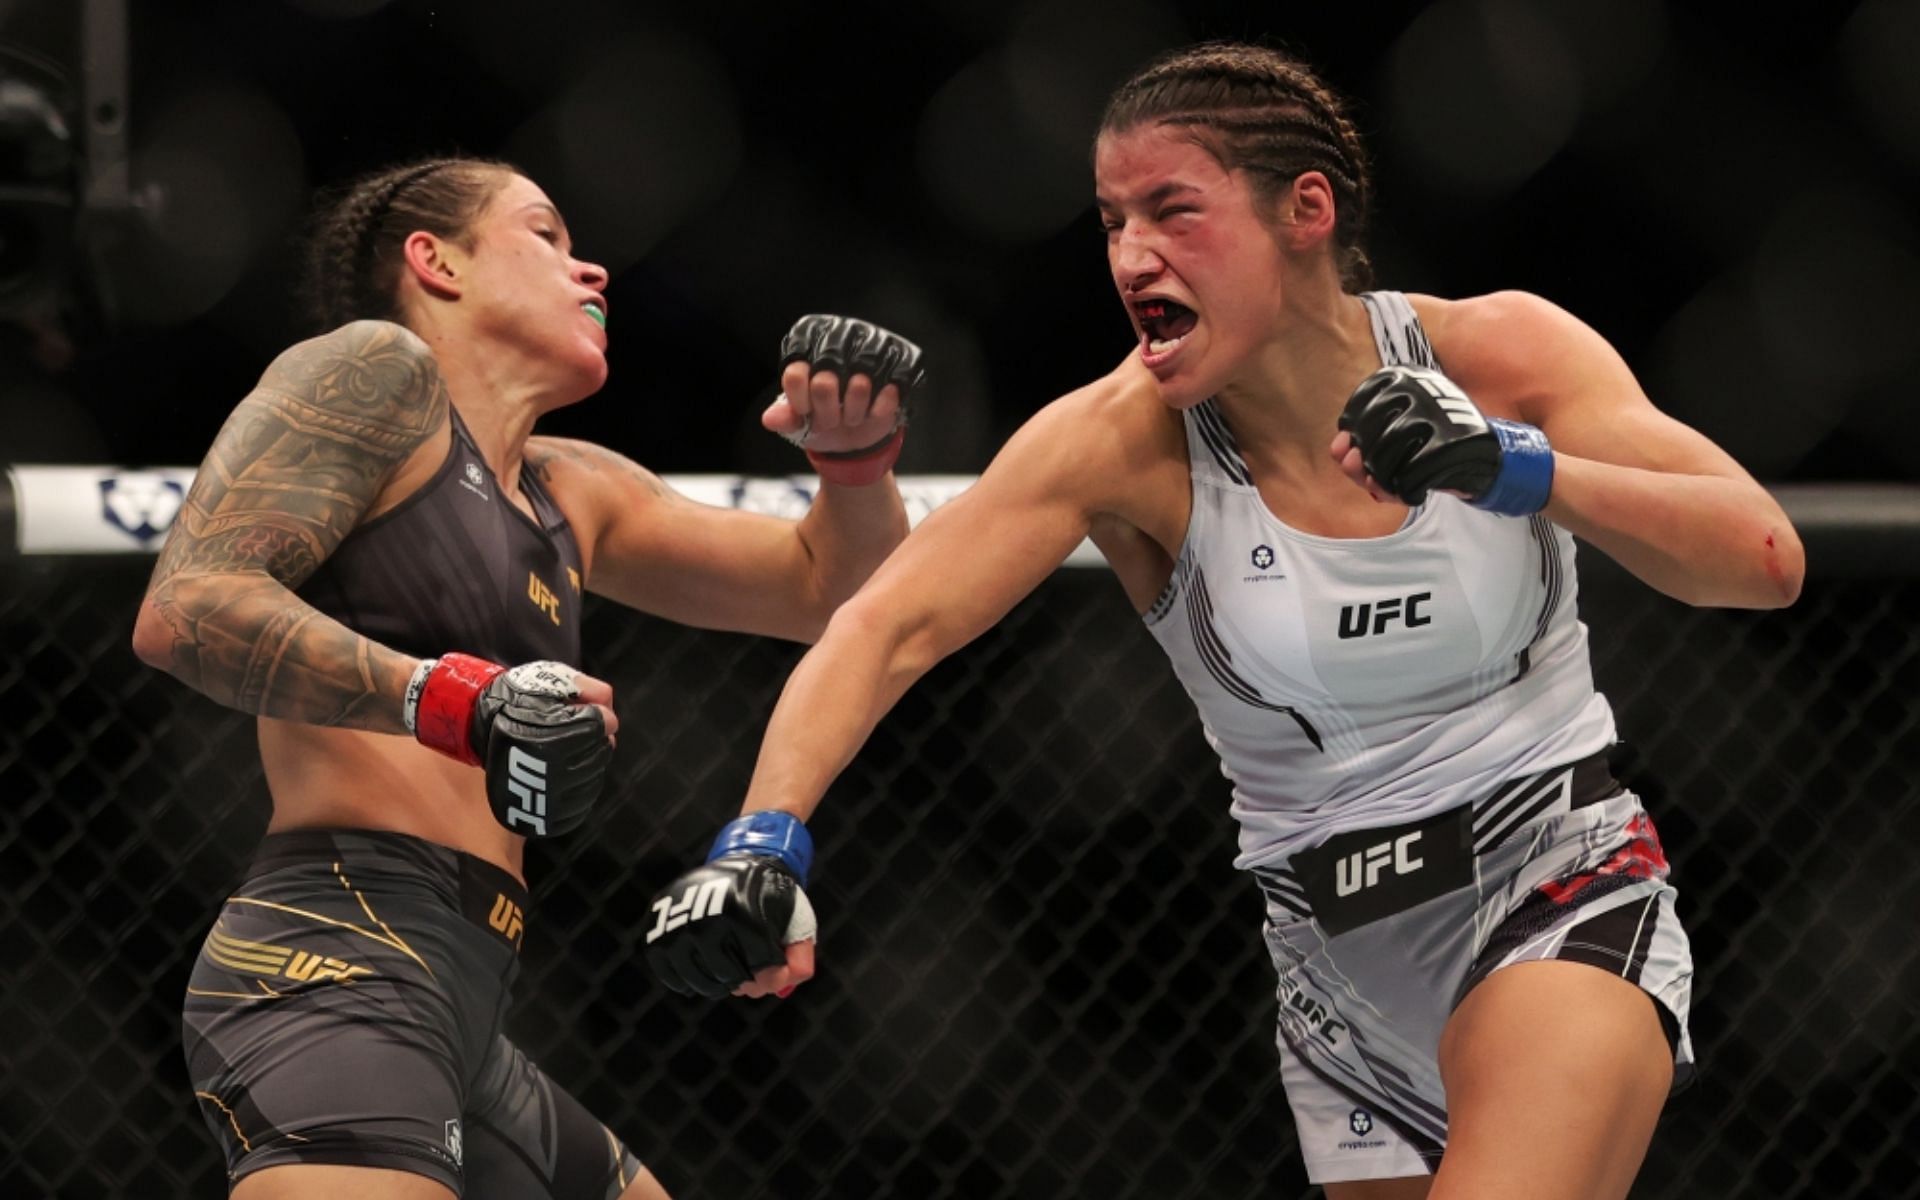 Where does Julianna Pena&#039;s win over Amanda Nunes rank in the UFC&#039;s overall pantheon of great upsets?